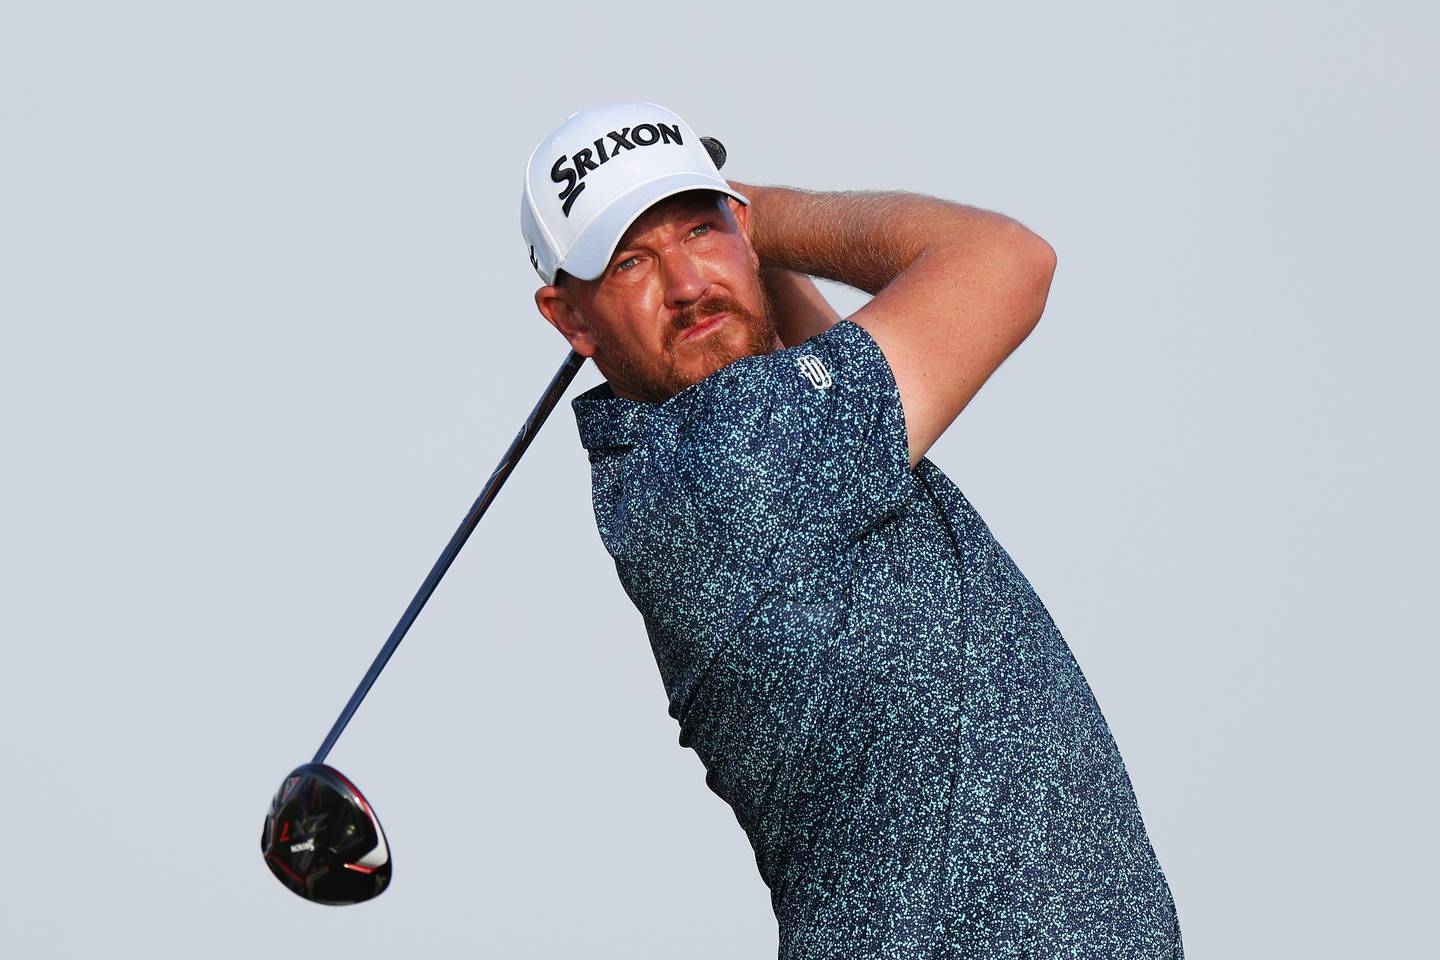 Jacques Kruyswijk in action on day one at Yas Links. Getty